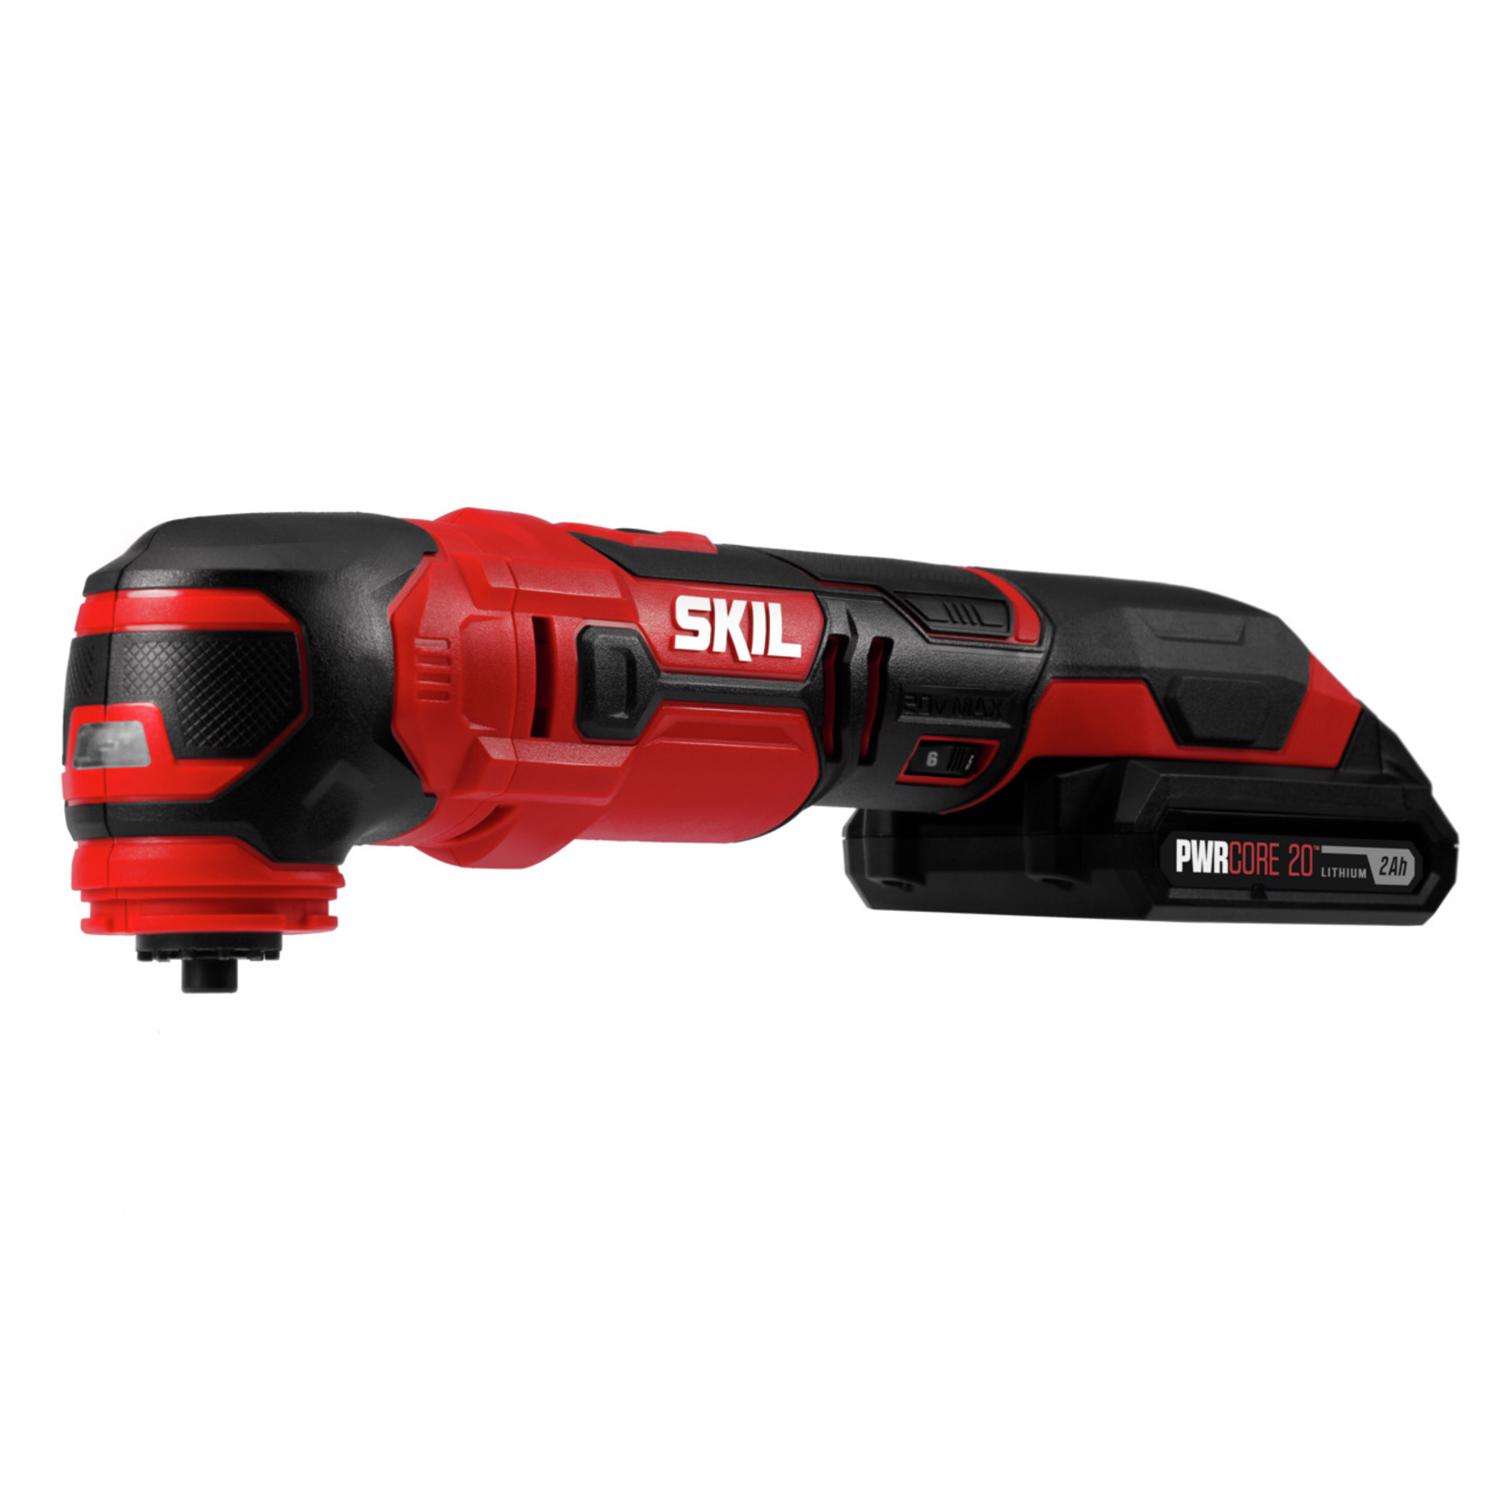 Skil has a Compact Cordless (Brushless) Reciprocating Saw, and it's  Ridiculously Cheap